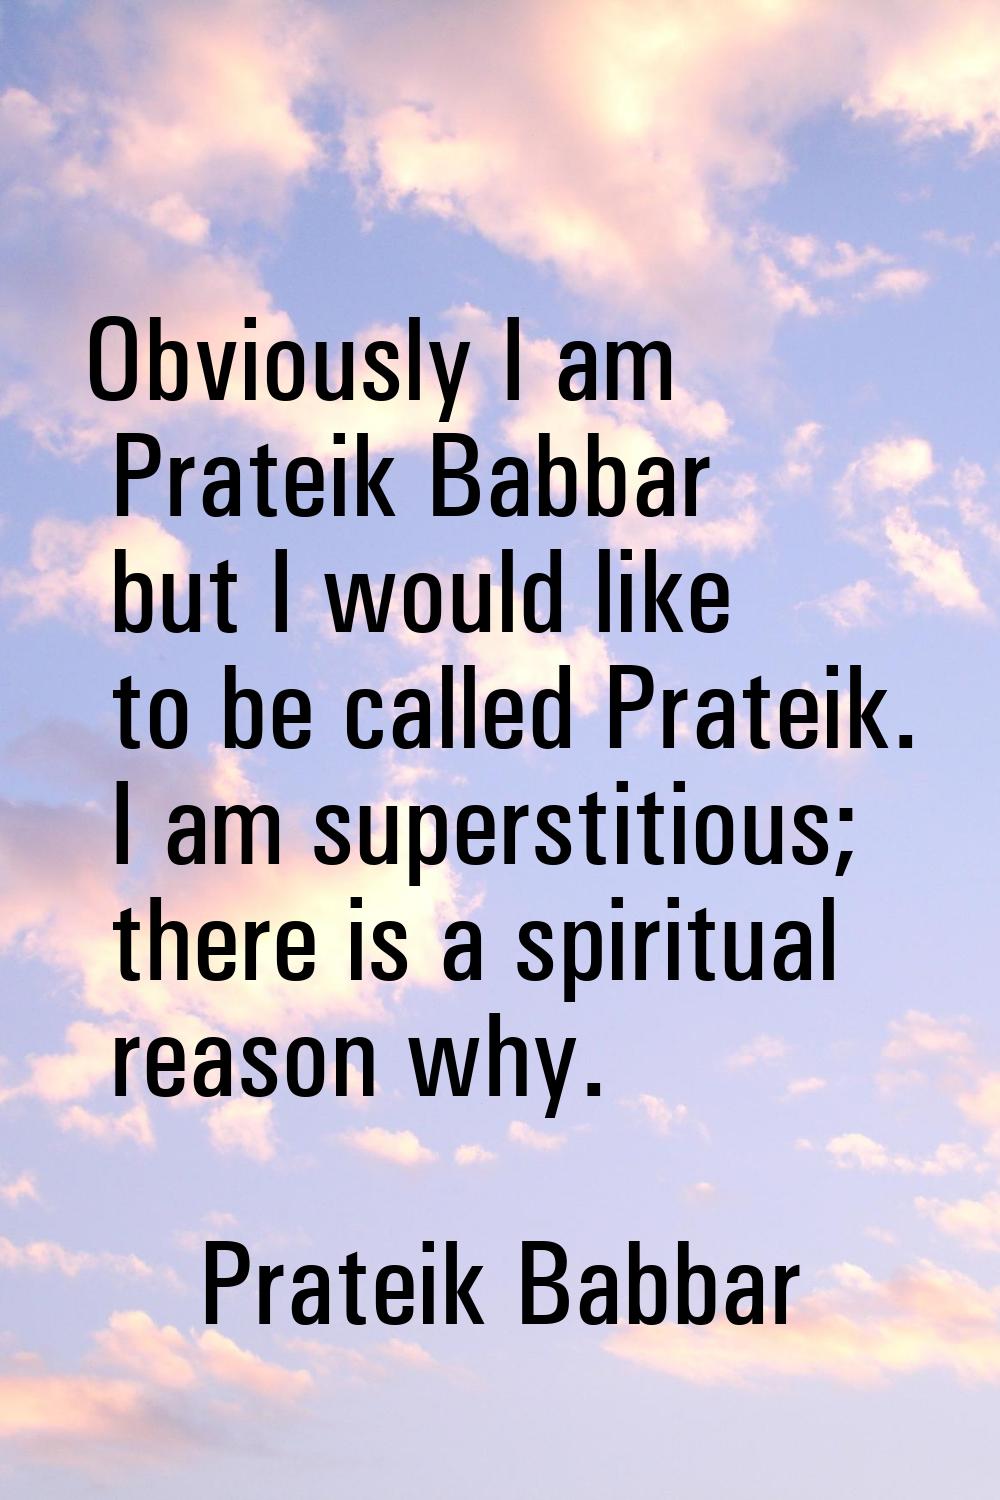 Obviously I am Prateik Babbar but I would like to be called Prateik. I am superstitious; there is a